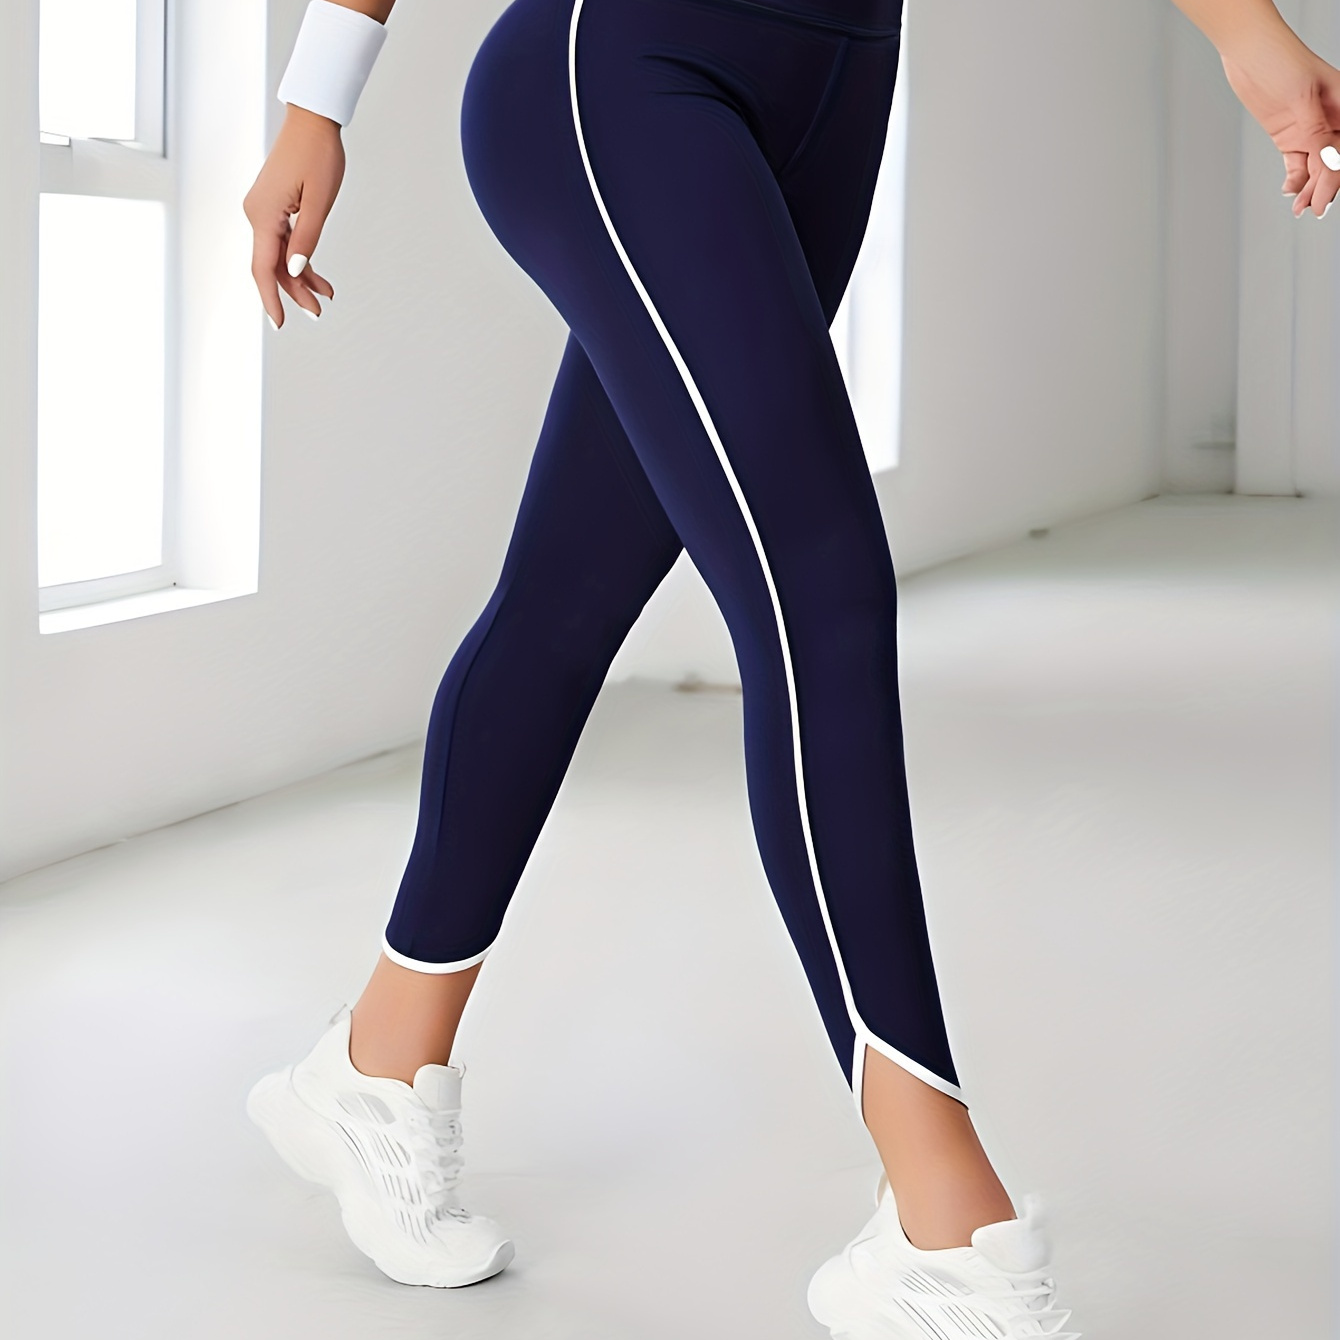 

Women's High-waist Athletic Leggings With Side Stripe Detail, Sporty Fitness Pants For Outdoor And Gym Activities